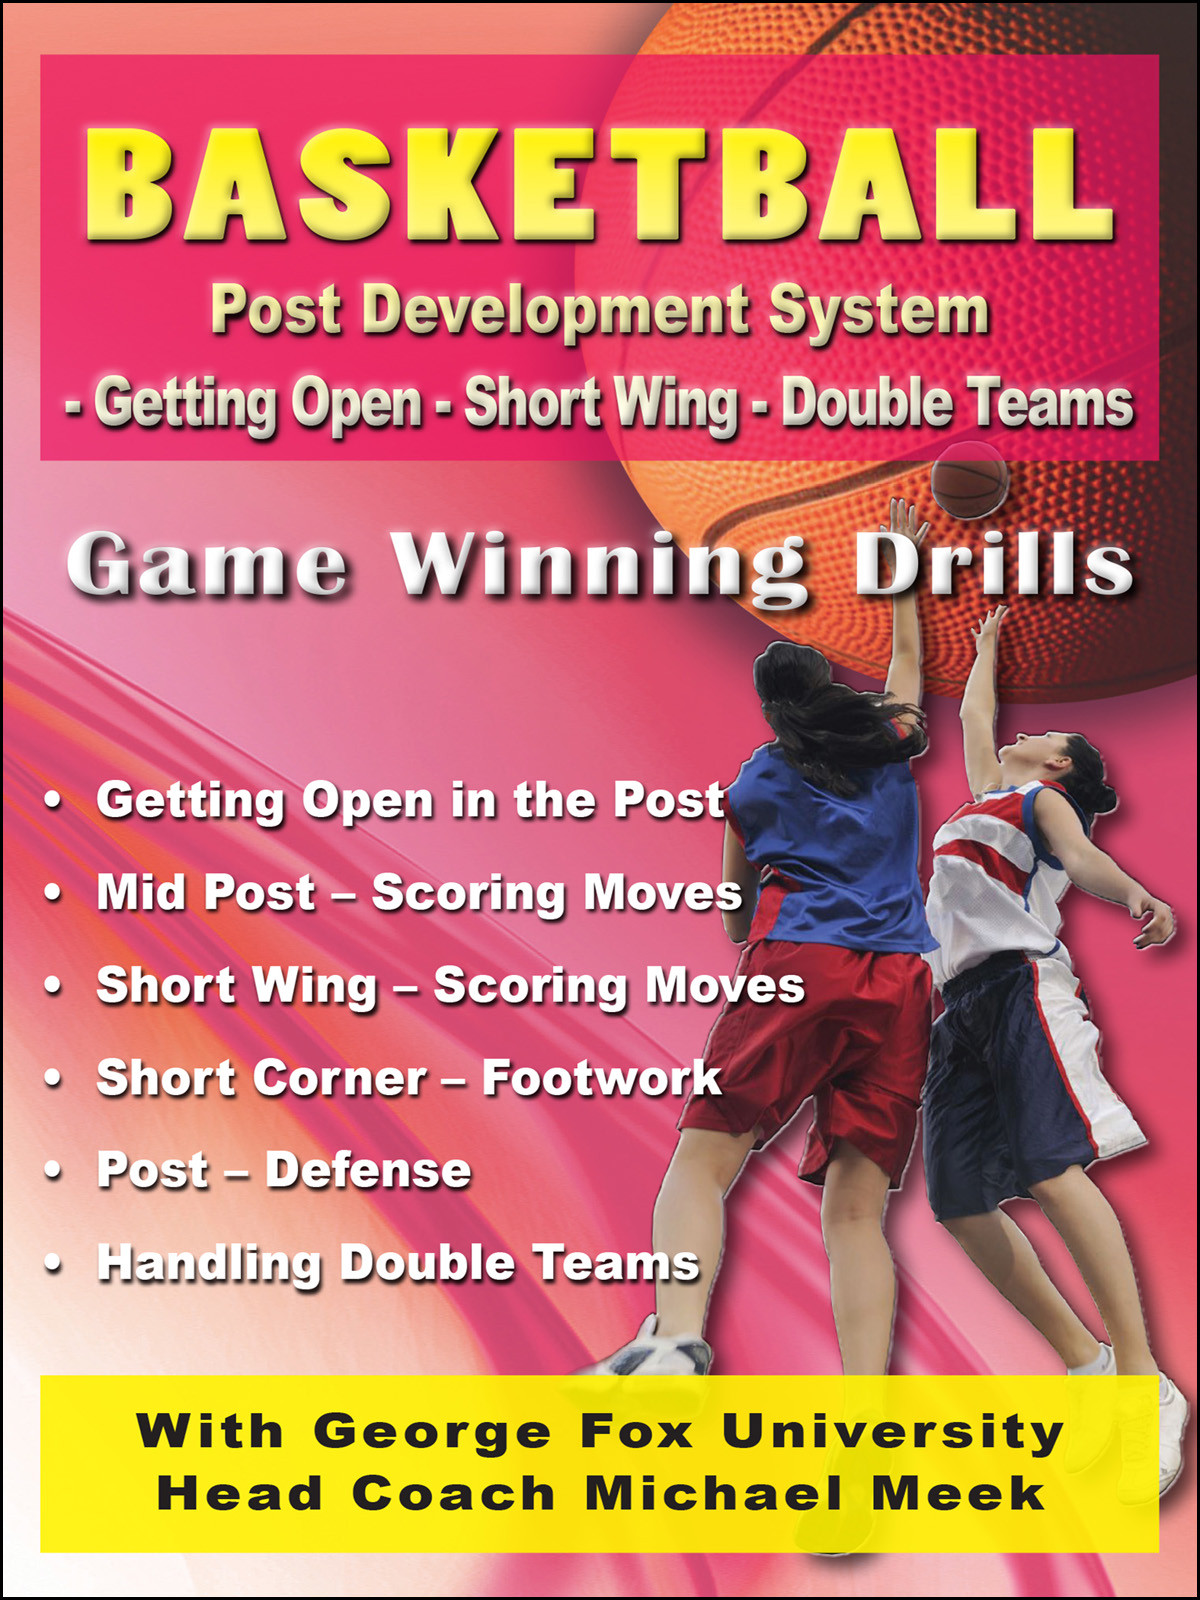 K4209 - Basketball Post Development System - Getting Open-Short Wing-Double Teams